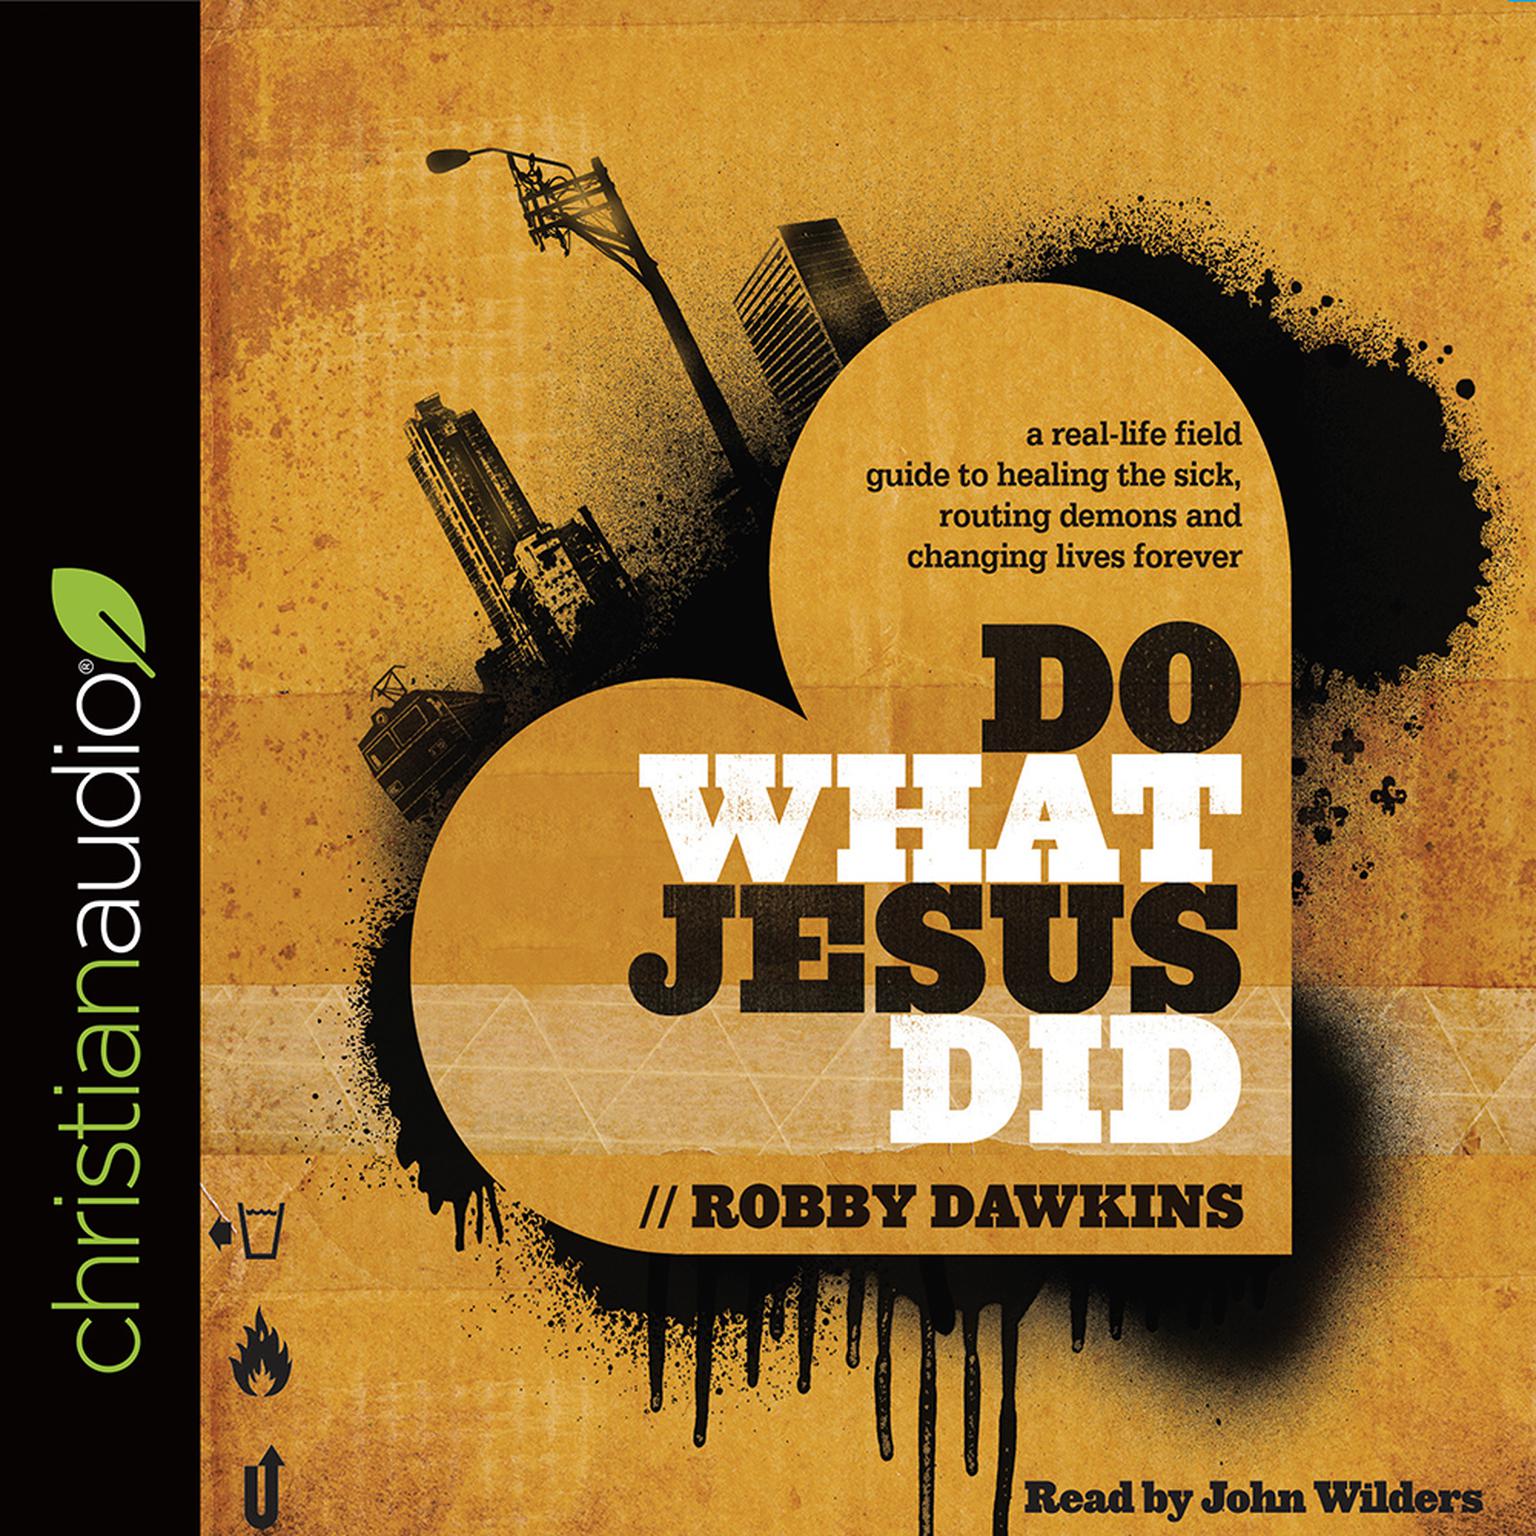 Do What Jesus Did: A Real-Life Field Guide to Healing the Sick, Routing Demons and Changing Lives Forever Audiobook, by Robby Dawkins